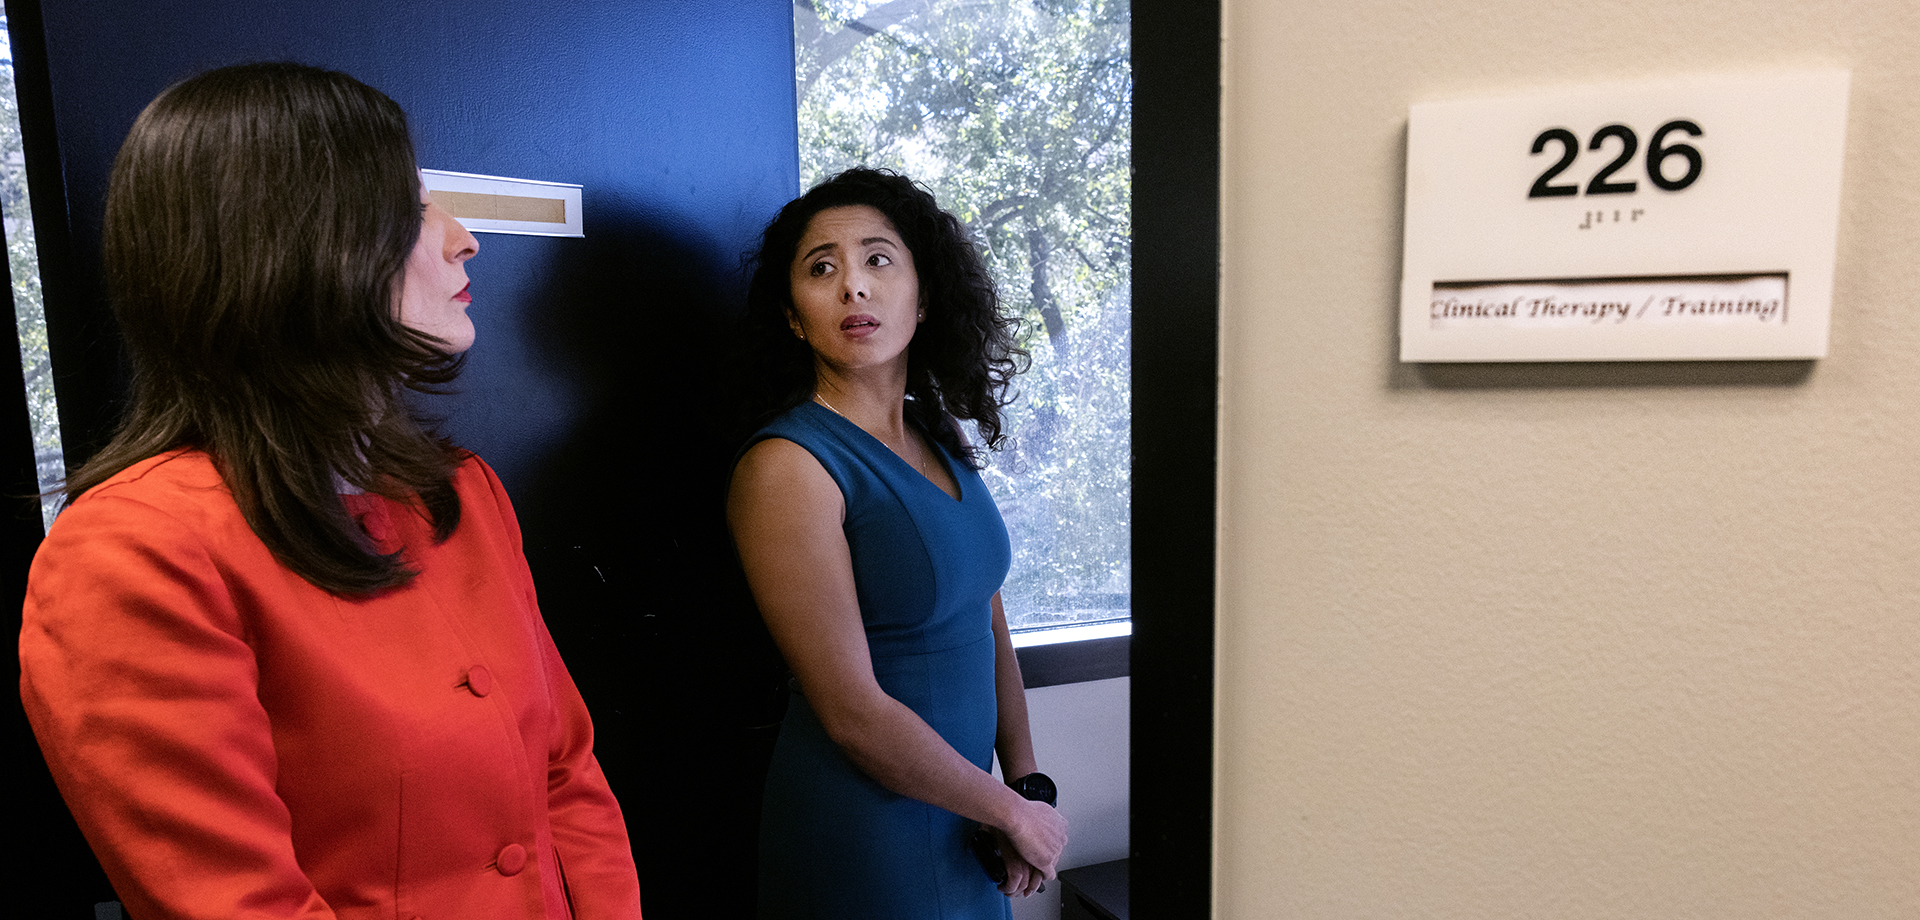 Harris County Precinct 4 Commissioner Lesley Briones and Harris County Judge Lina Hidalgo tour the Harris Center for Mental Health and IDD